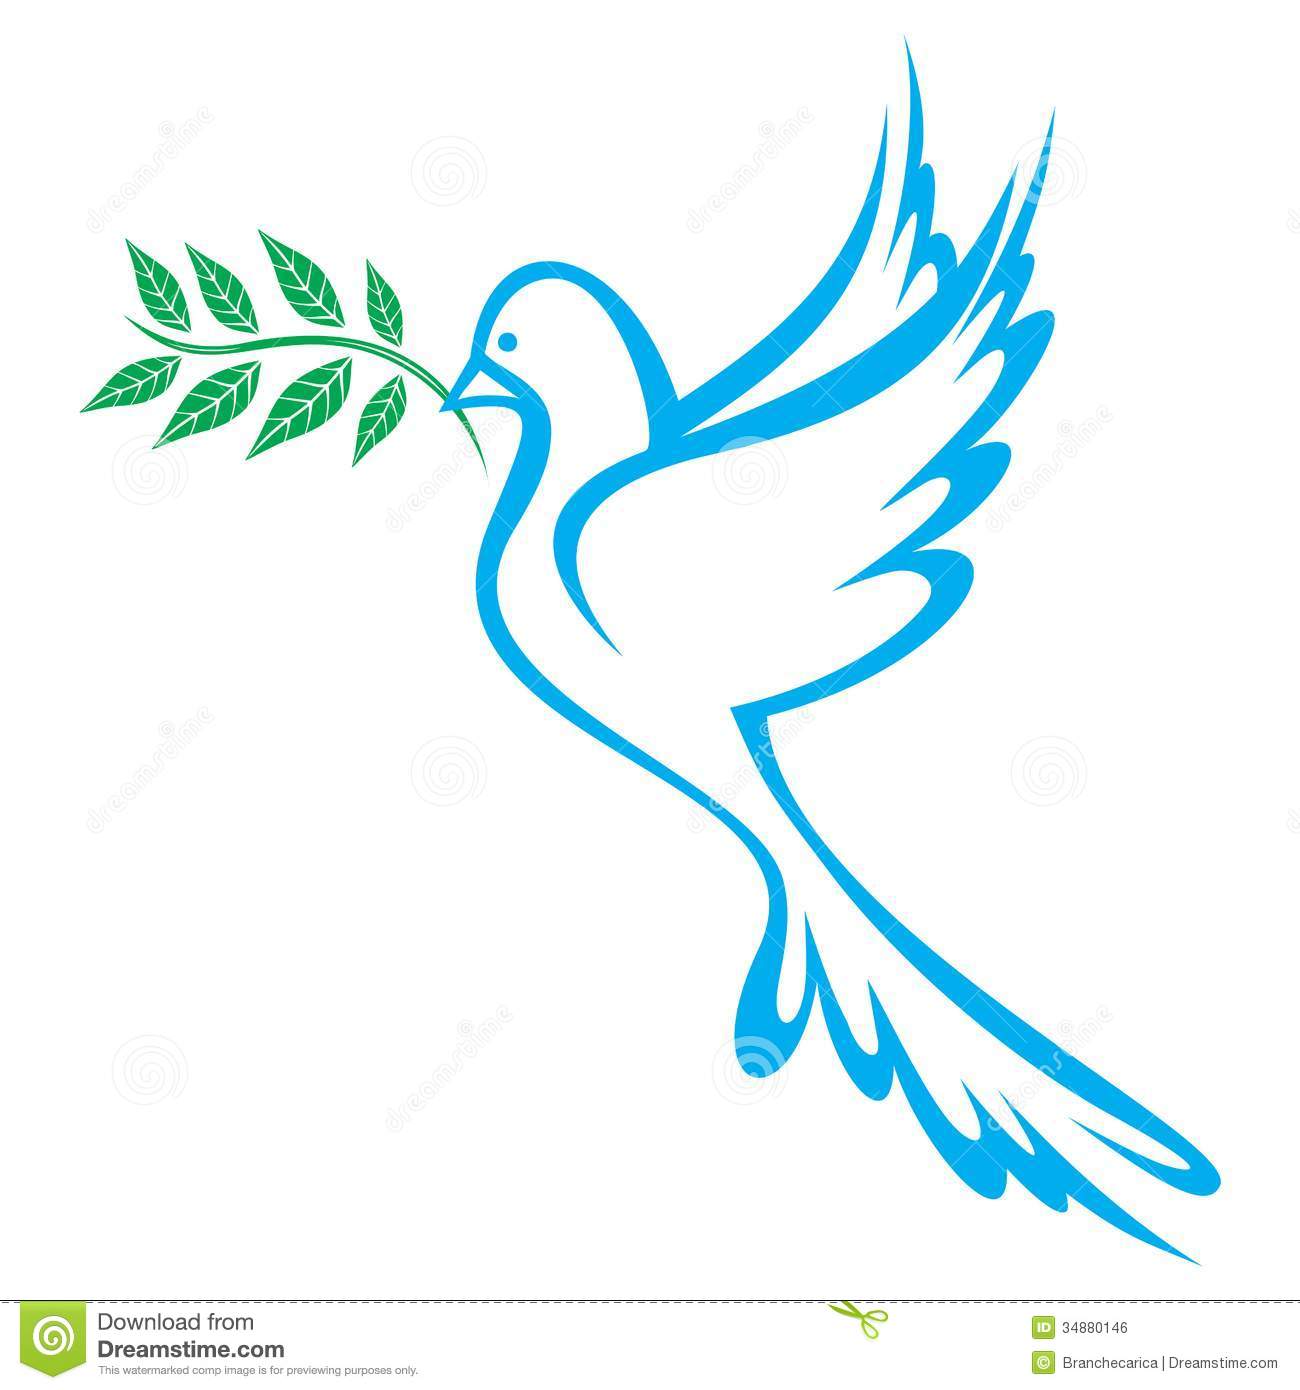 Dove Of Peace Royalty Free Stock Image   Image  34880146